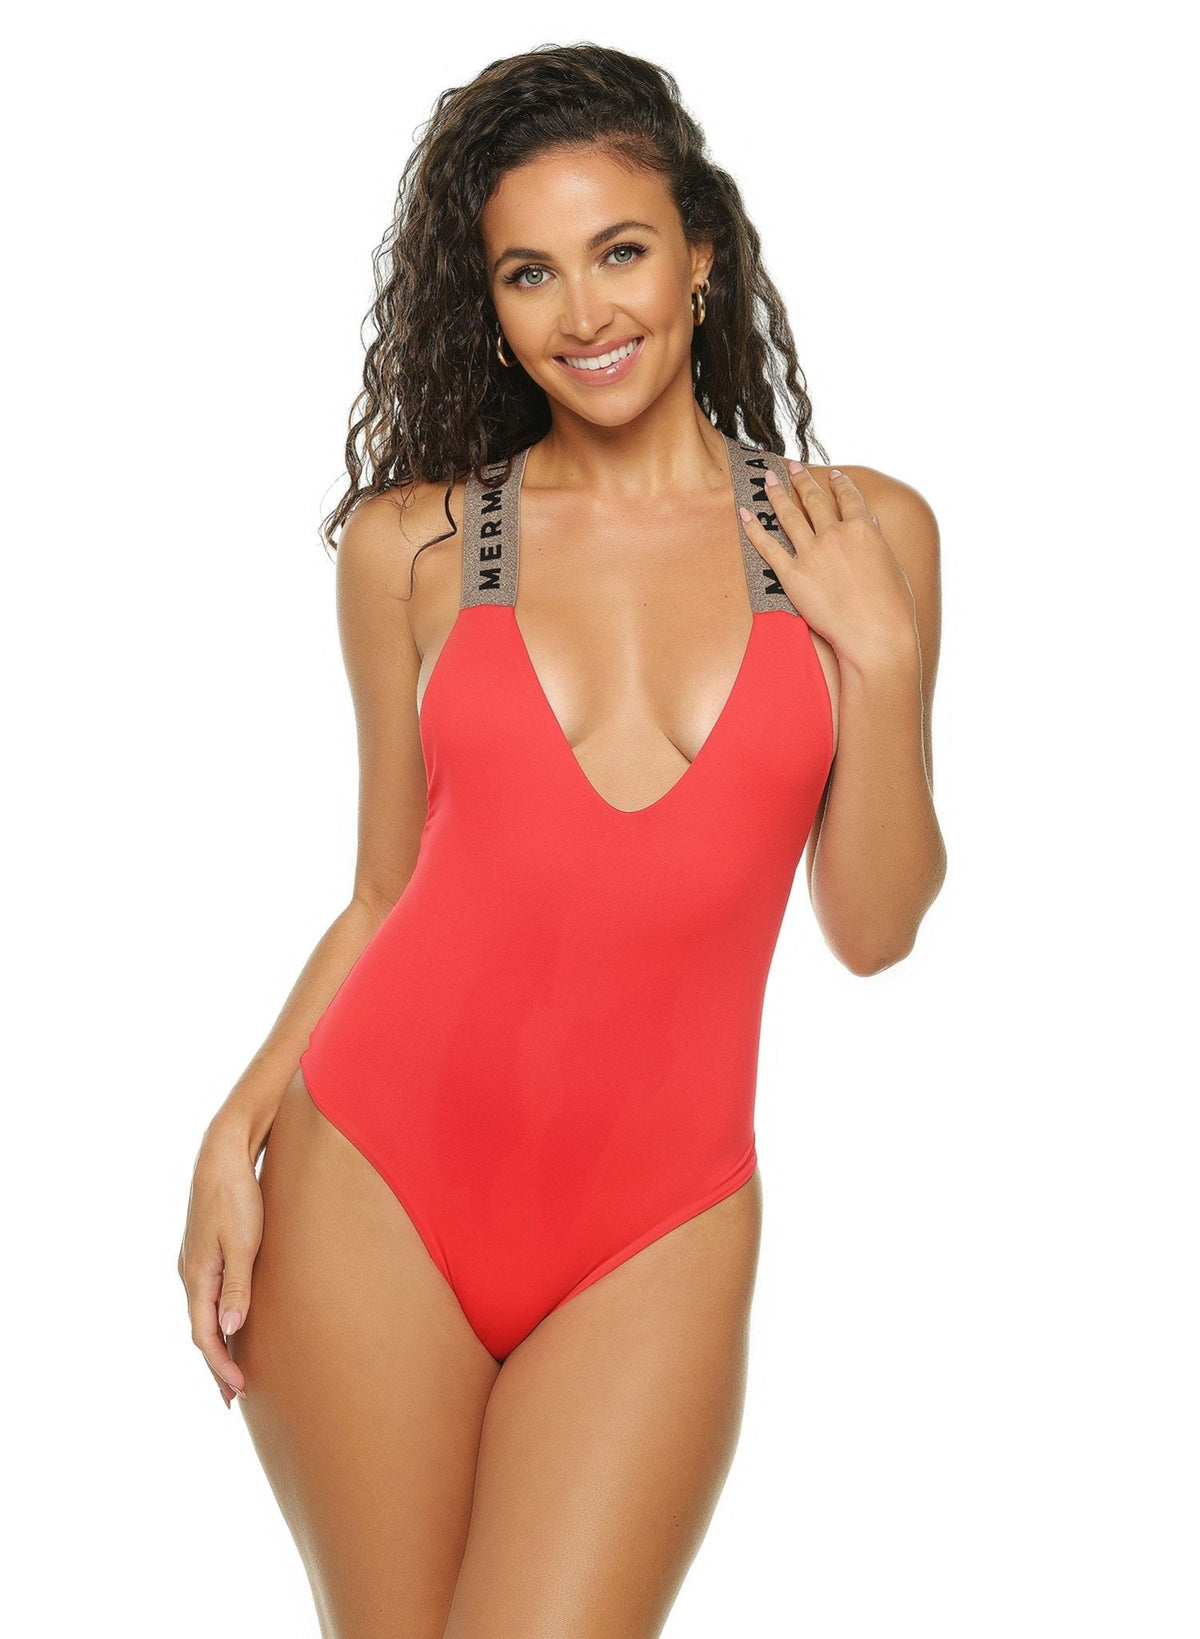 Salty One Piece - Cherry Bomb Babe / Rose Gold